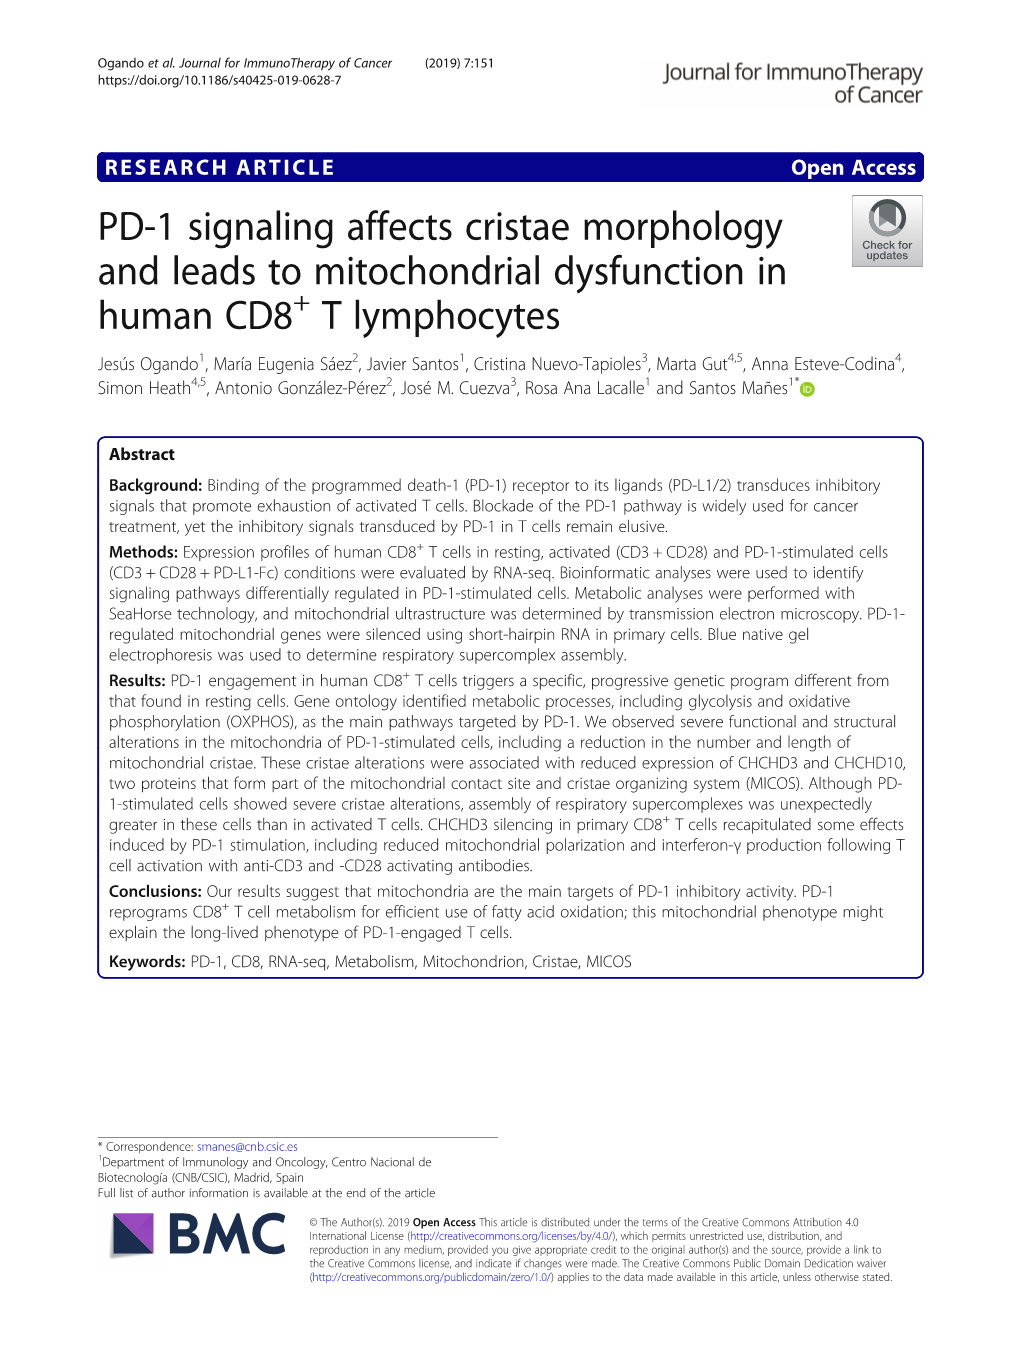 PD-1 Signaling Affects Cristae Morphology and Leads To